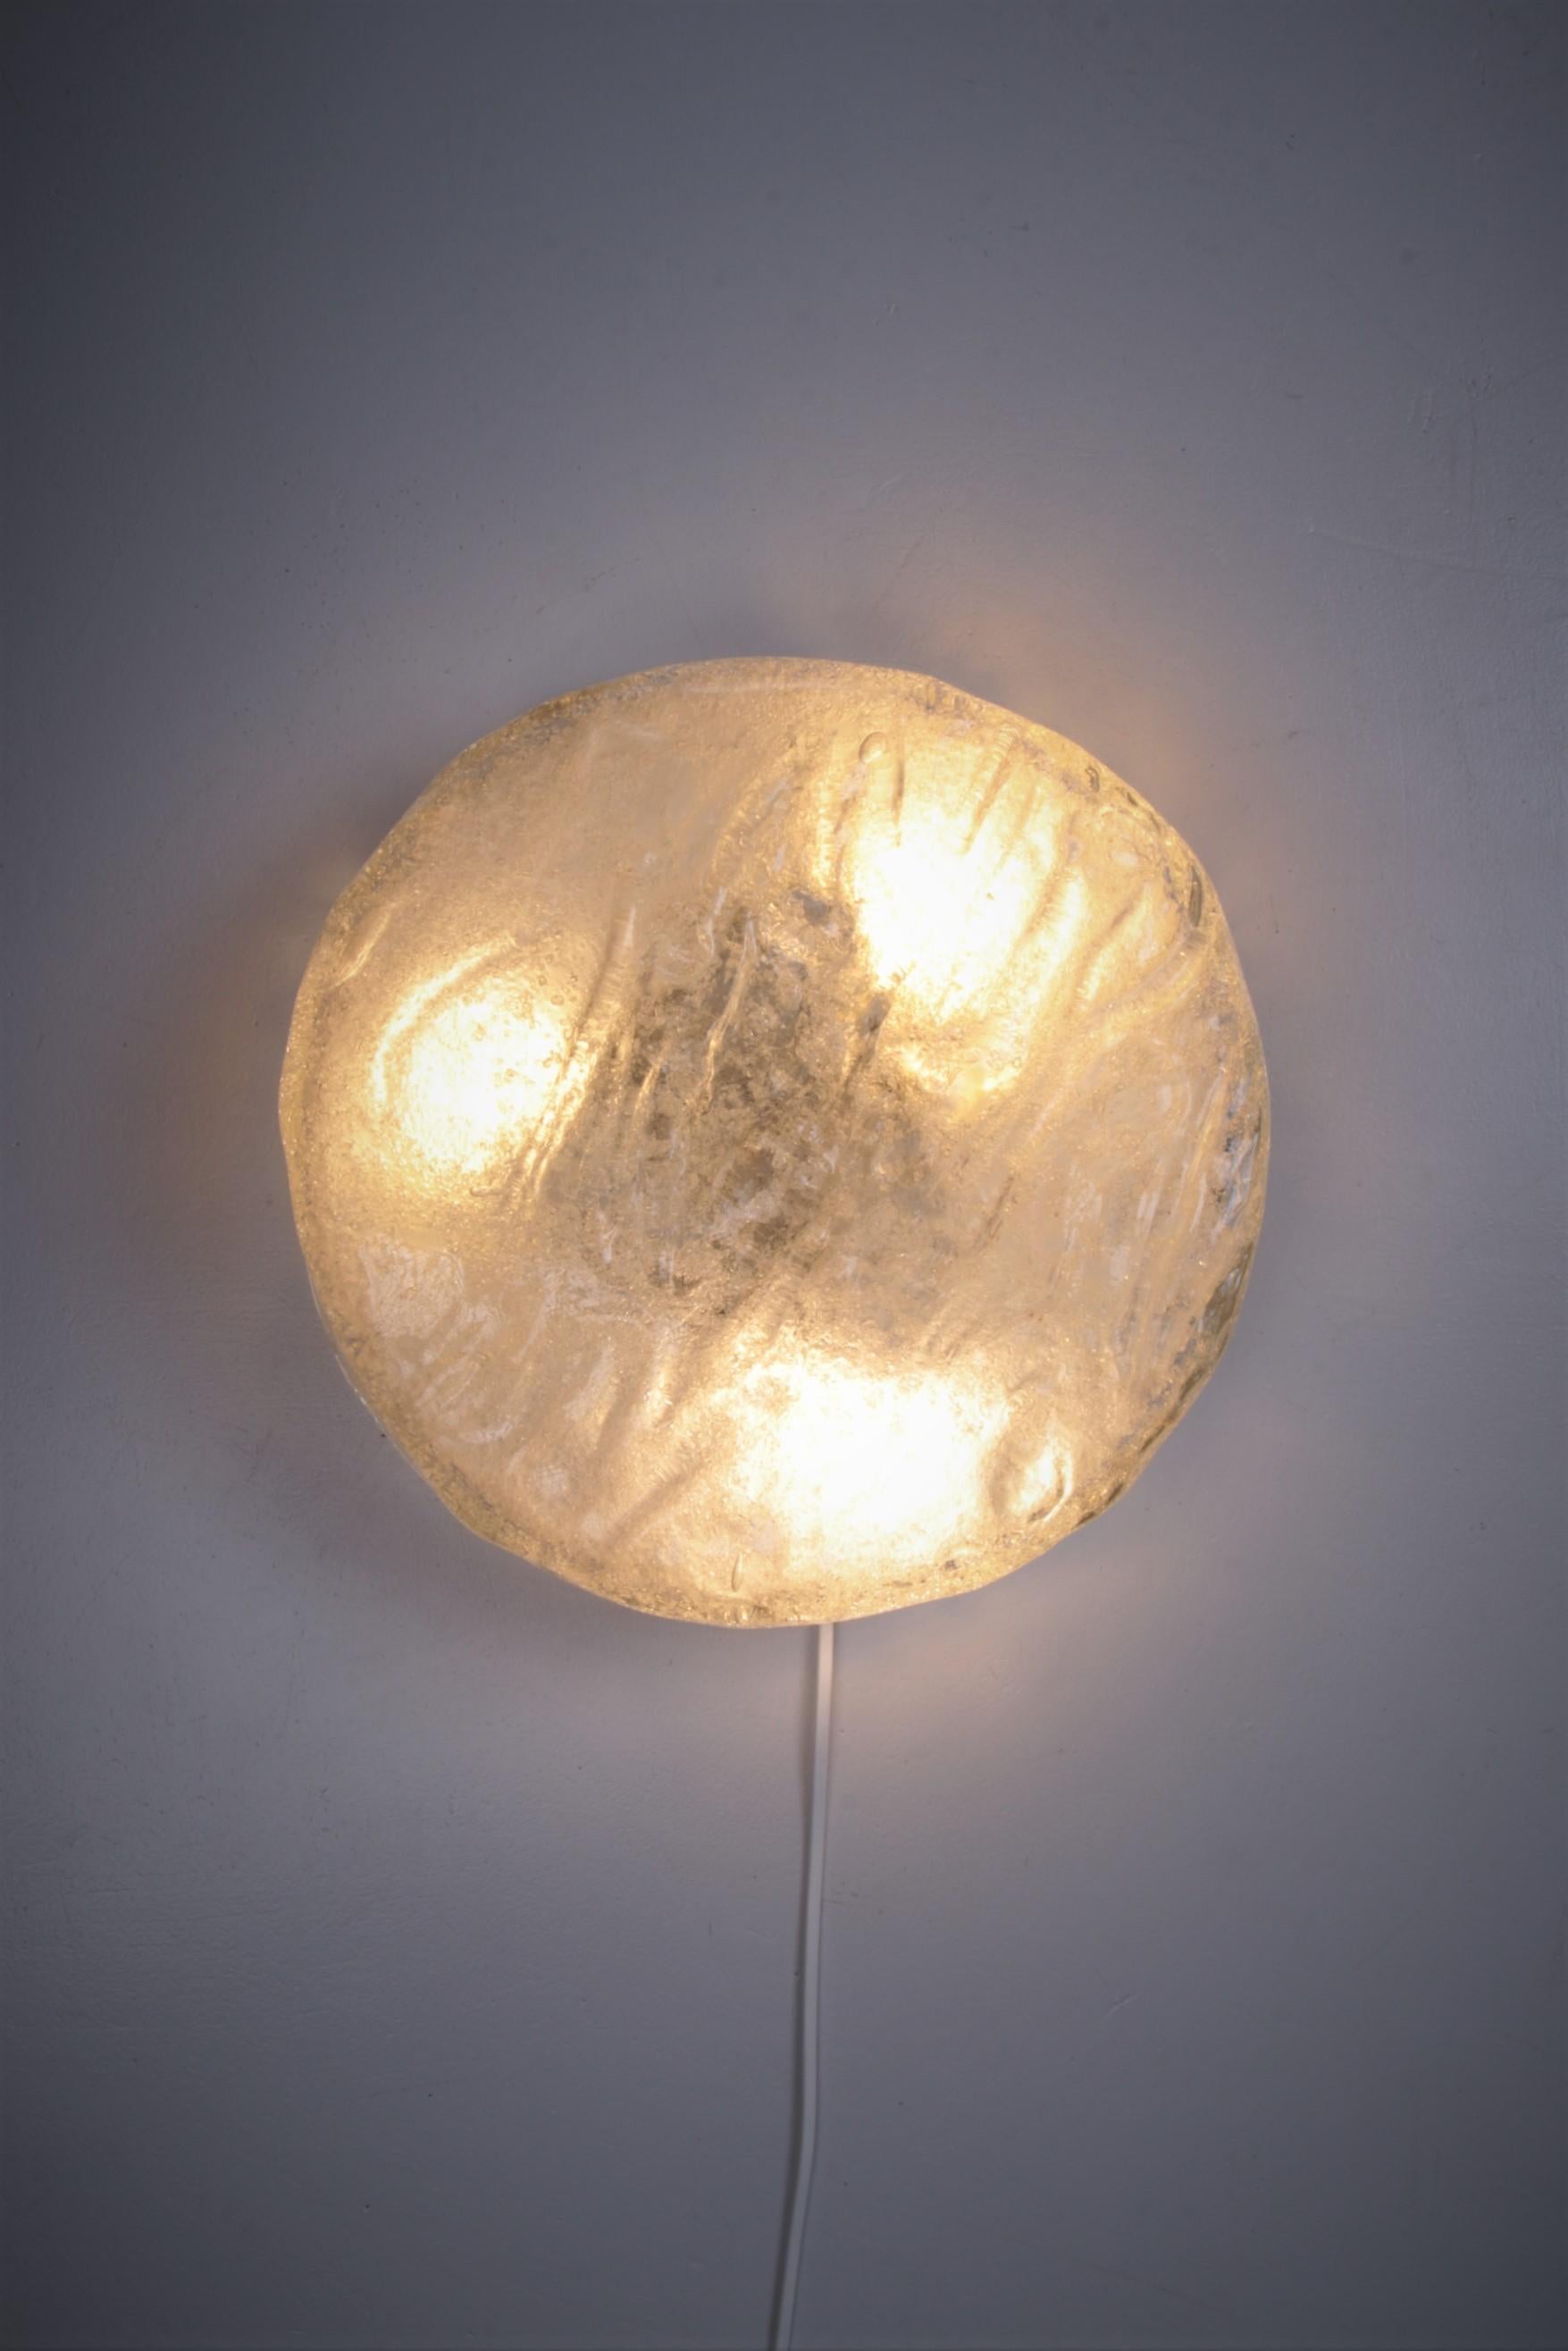 A beautiful round vintage ceiling lamp with glass shade made of special ice glass. The glass is of high quality and has a special texture that spreads the light in a beautiful way. Suitable for the ceiling, but can also be mounted on the